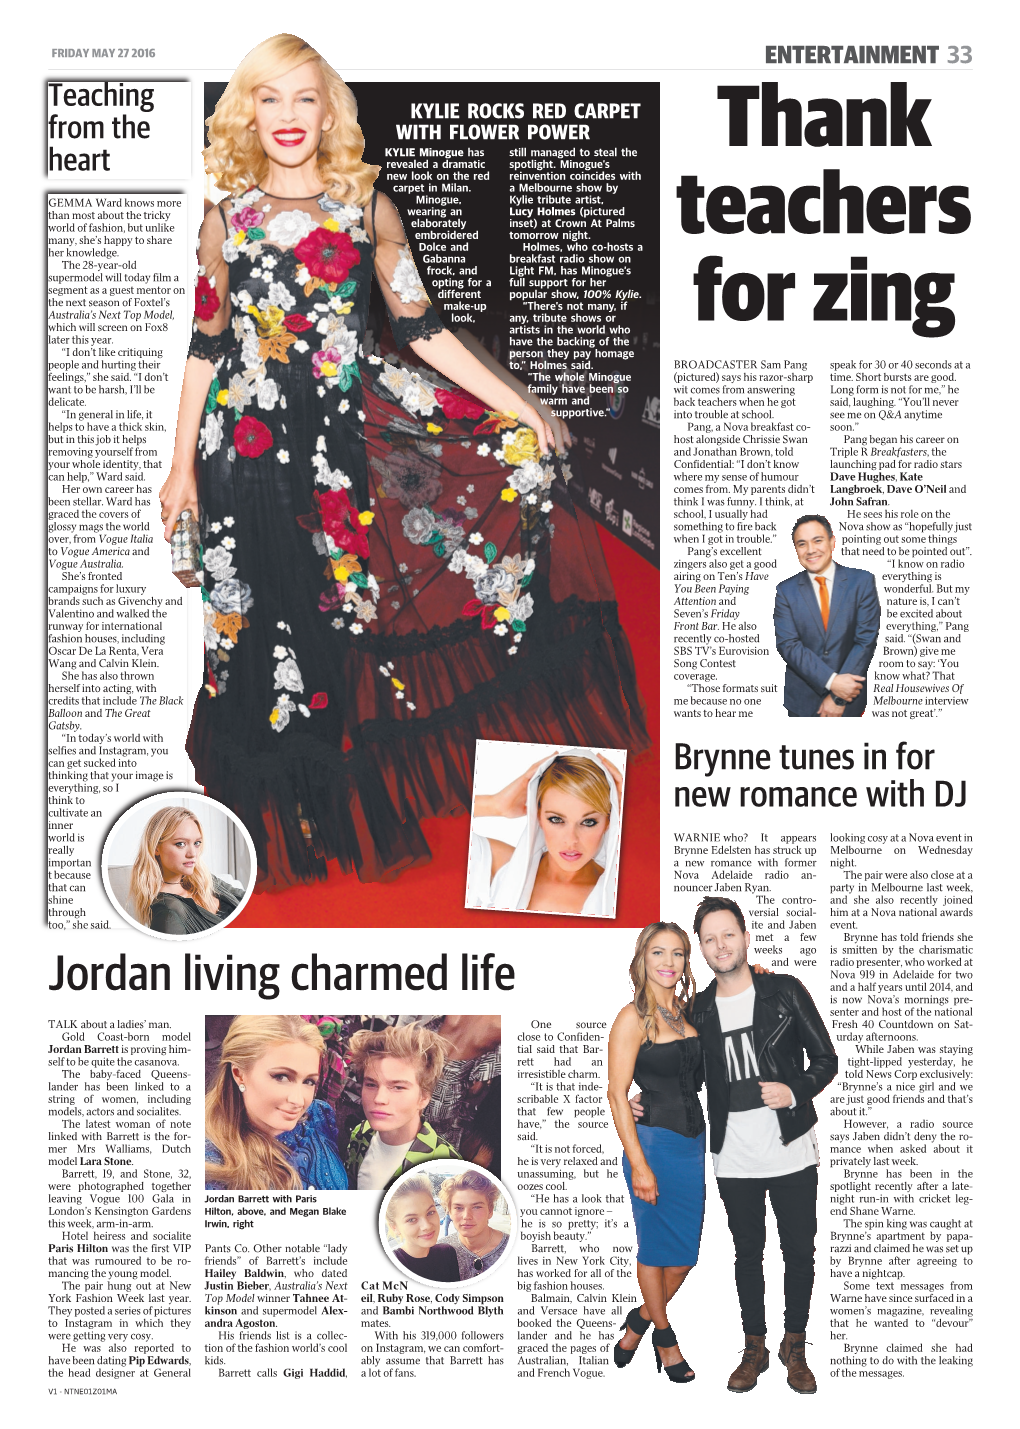 Jordan Living Charmed Life and a Half Years Until 2014, and Is Now Nova’S Mornings Pre- Senter and Host of the National TALK About a Ladies’ Man